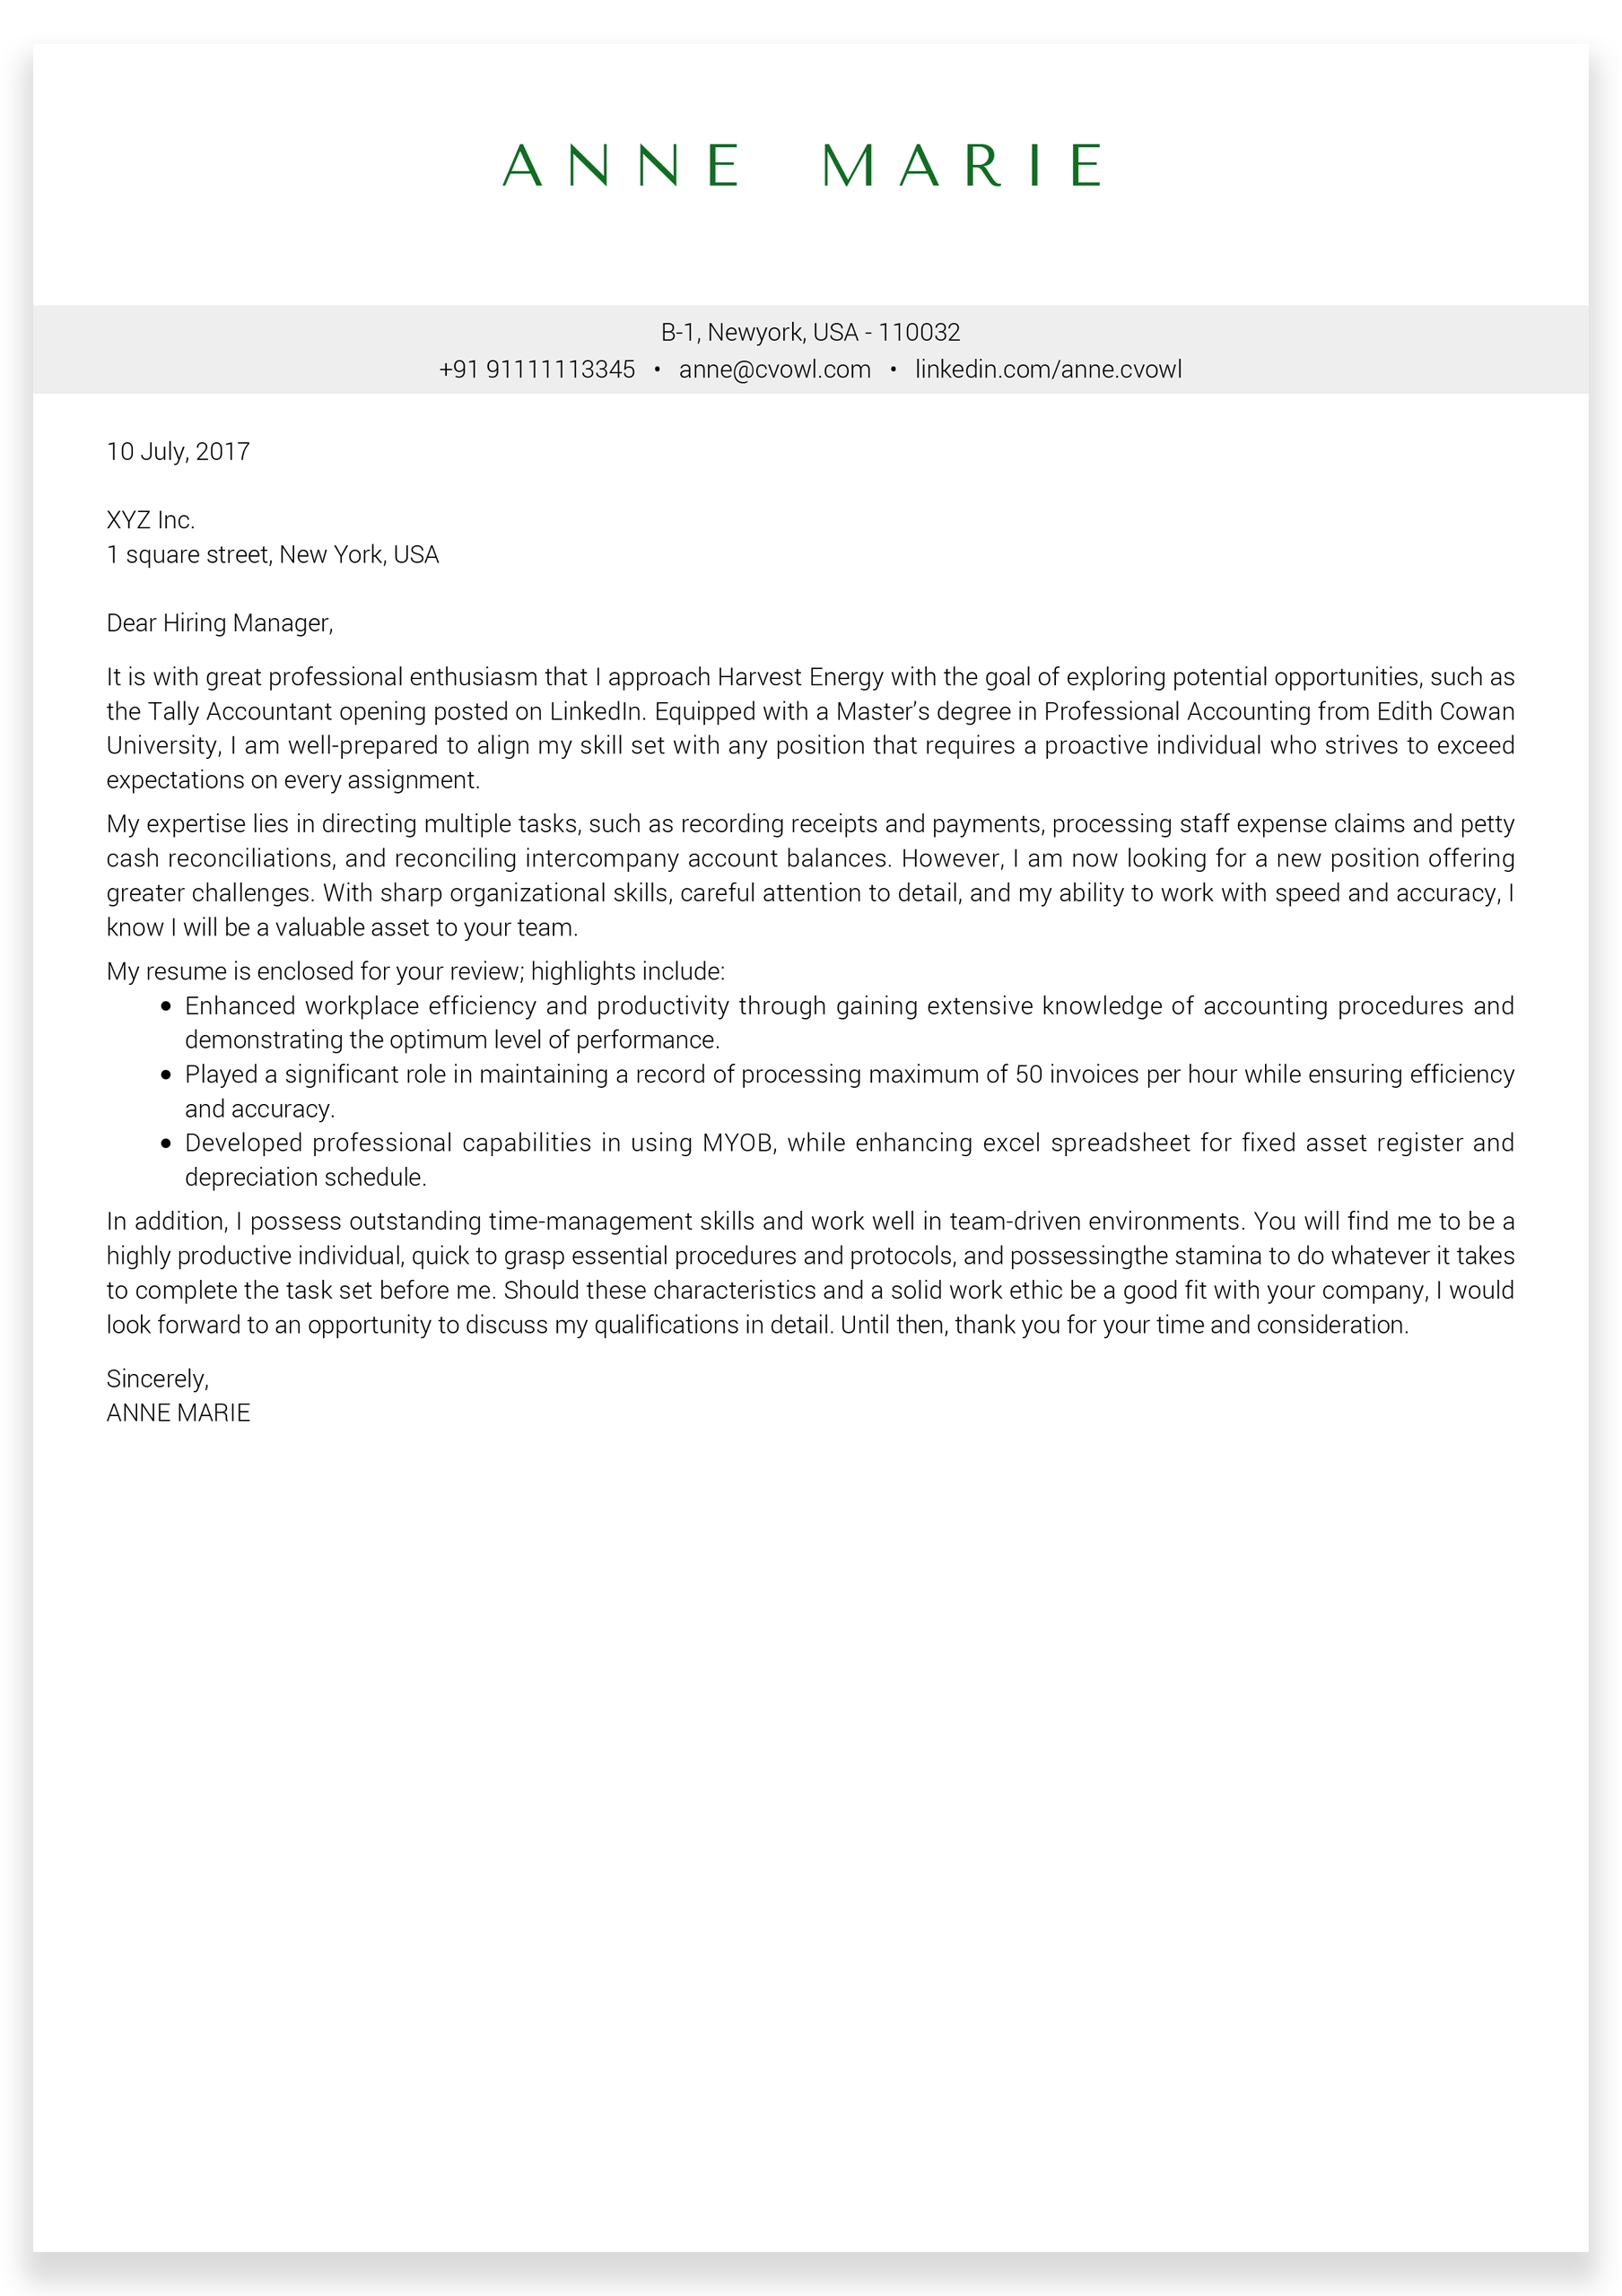 Industrial-Engineer-Cover-Letter-sample2